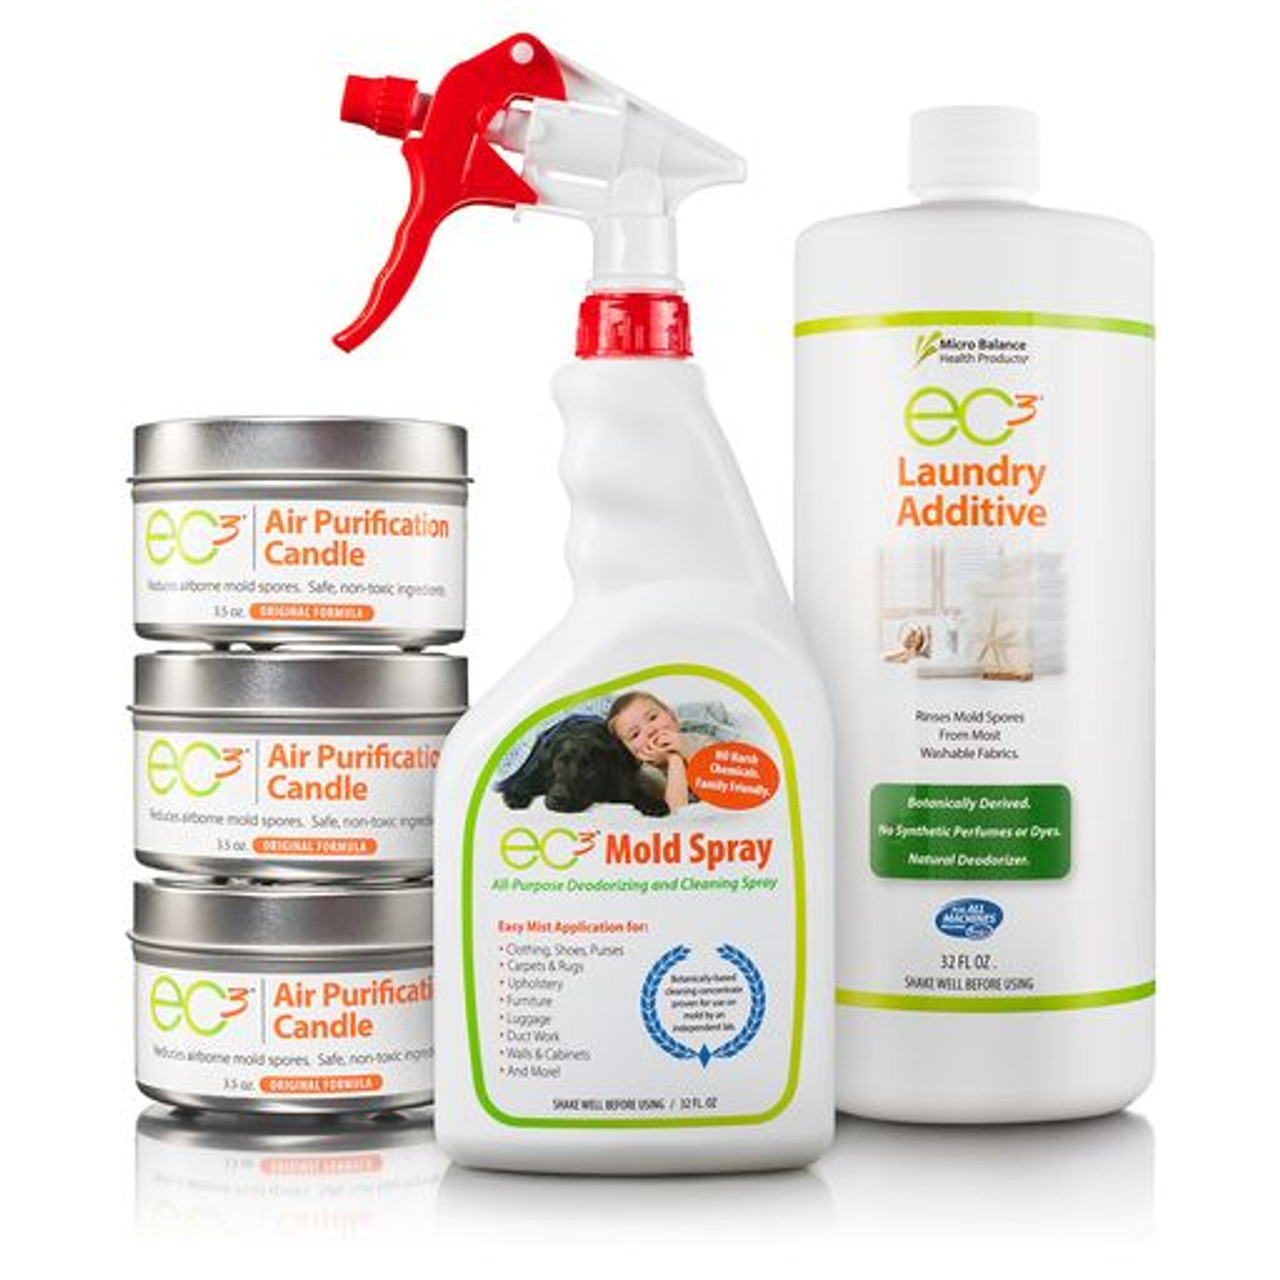 Laundry Cleaning Products, Shop Online